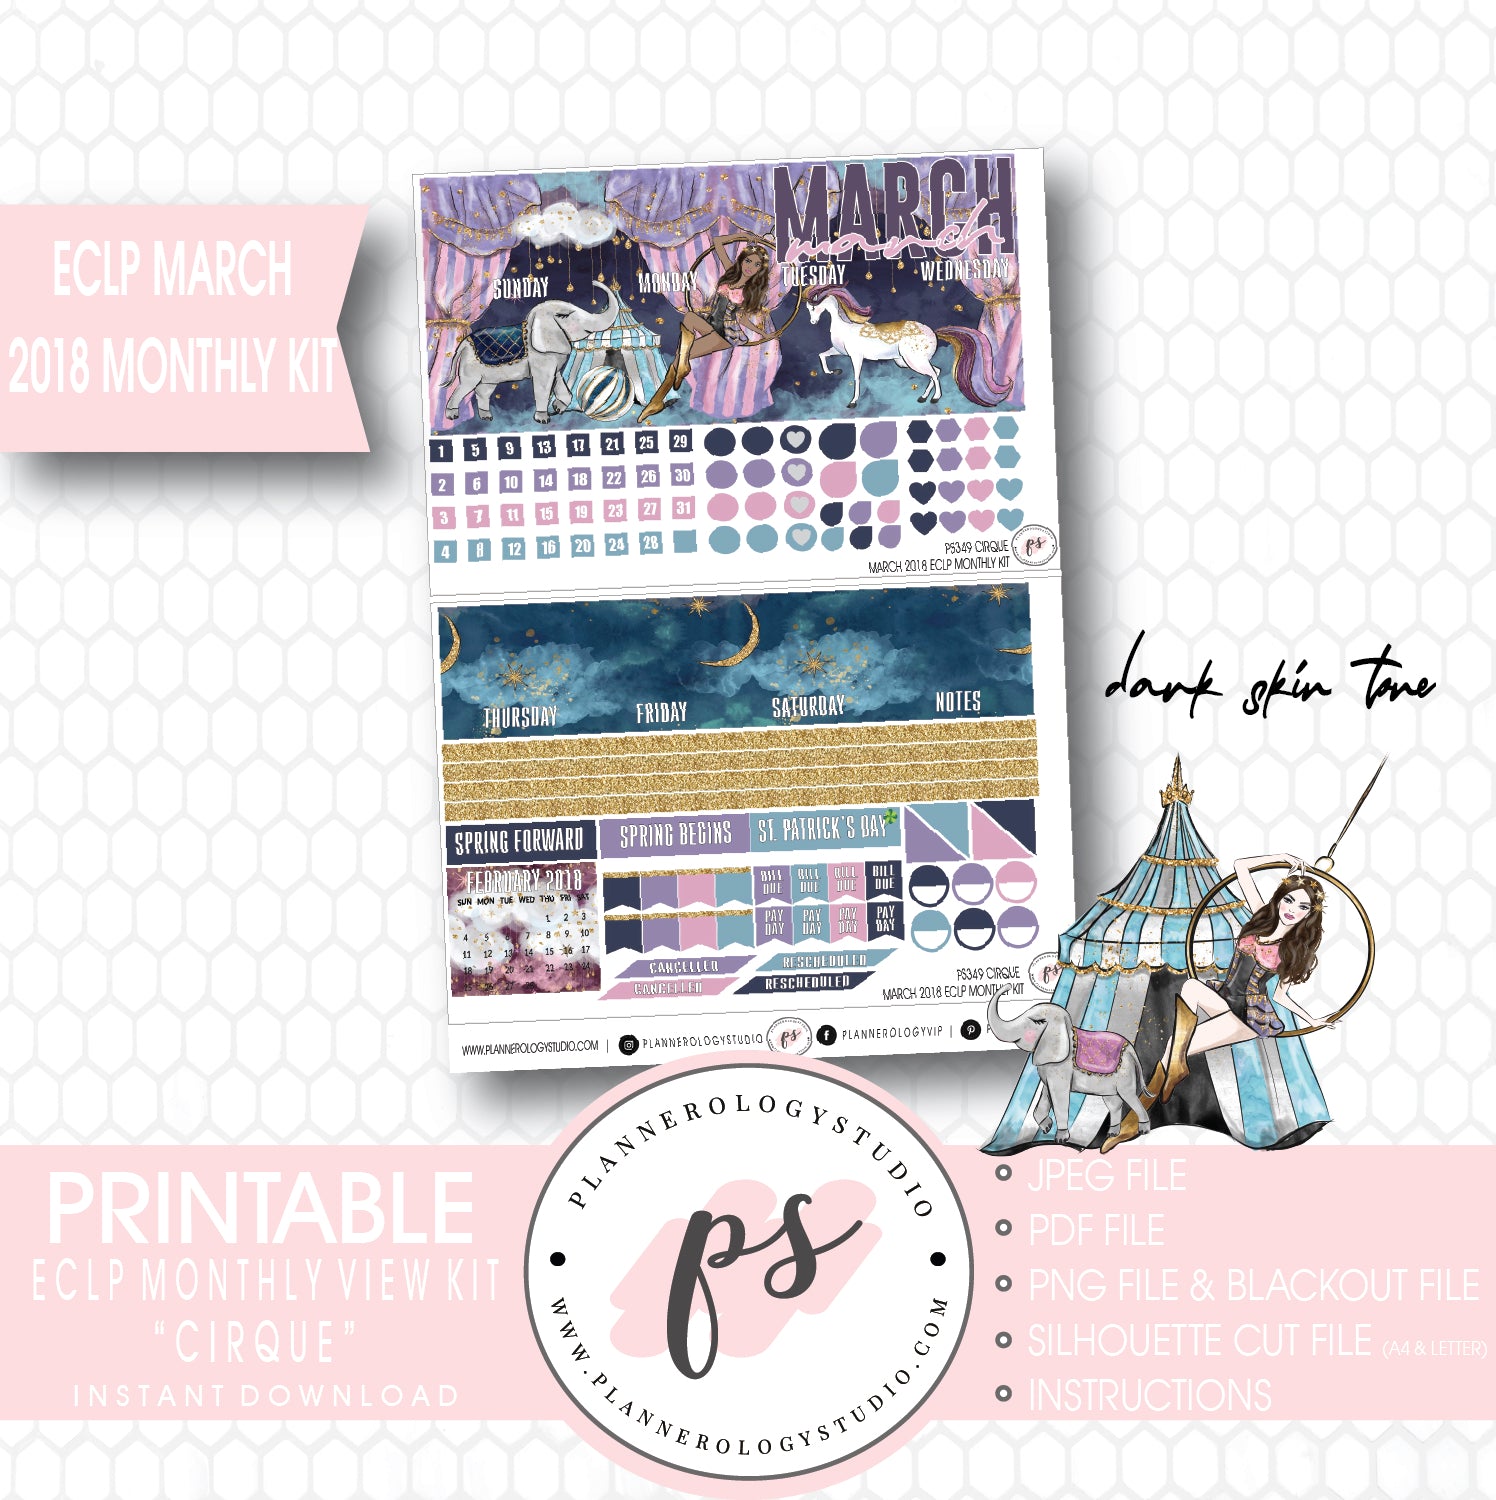 Cirque March 2018 Monthly View Kit Digital Printable Planner Stickers (for use with Erin Condren) - Plannerologystudio